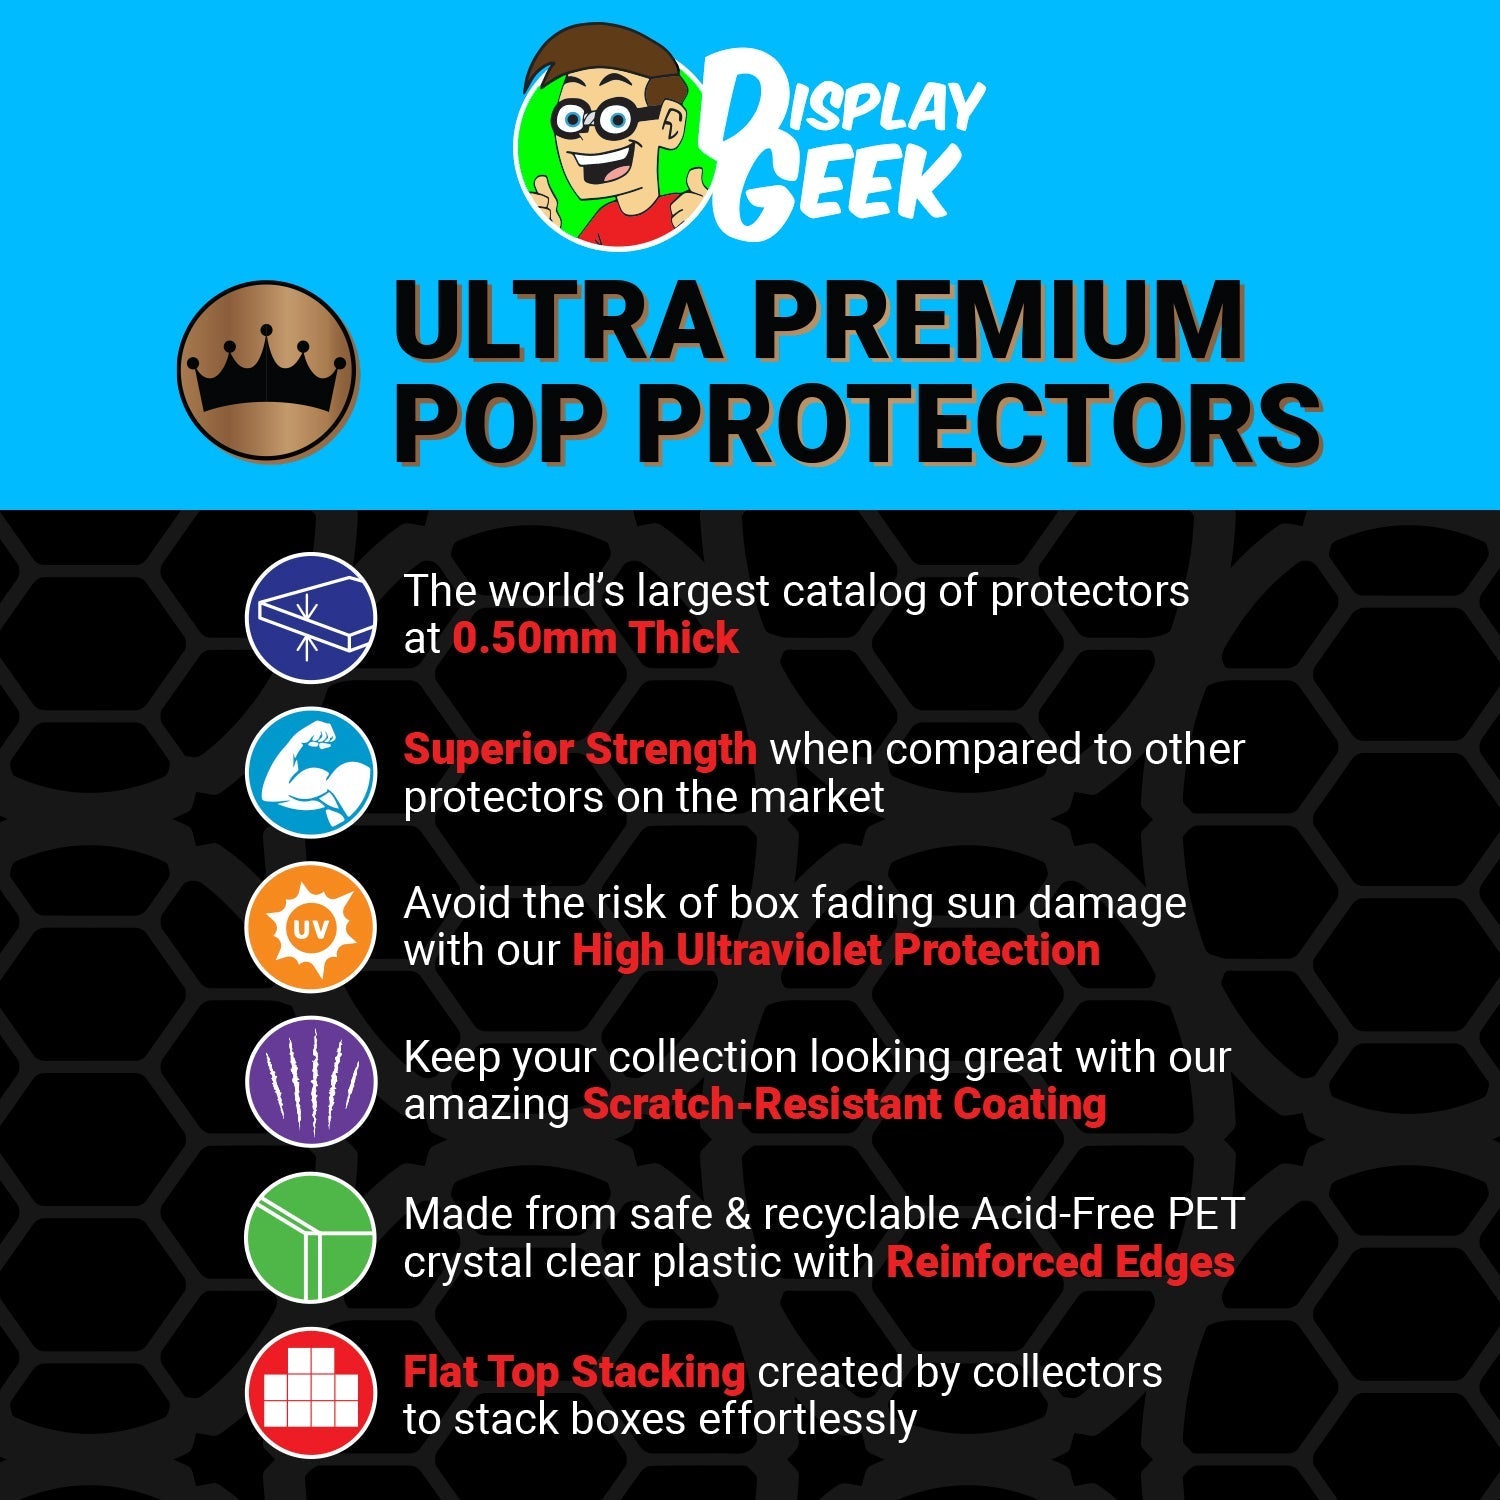 Pop Protector for Ant-Man & Ant-Thony #13 Funko Pop Rides - PPG Pop Protector Guide Search Created by Display Geek